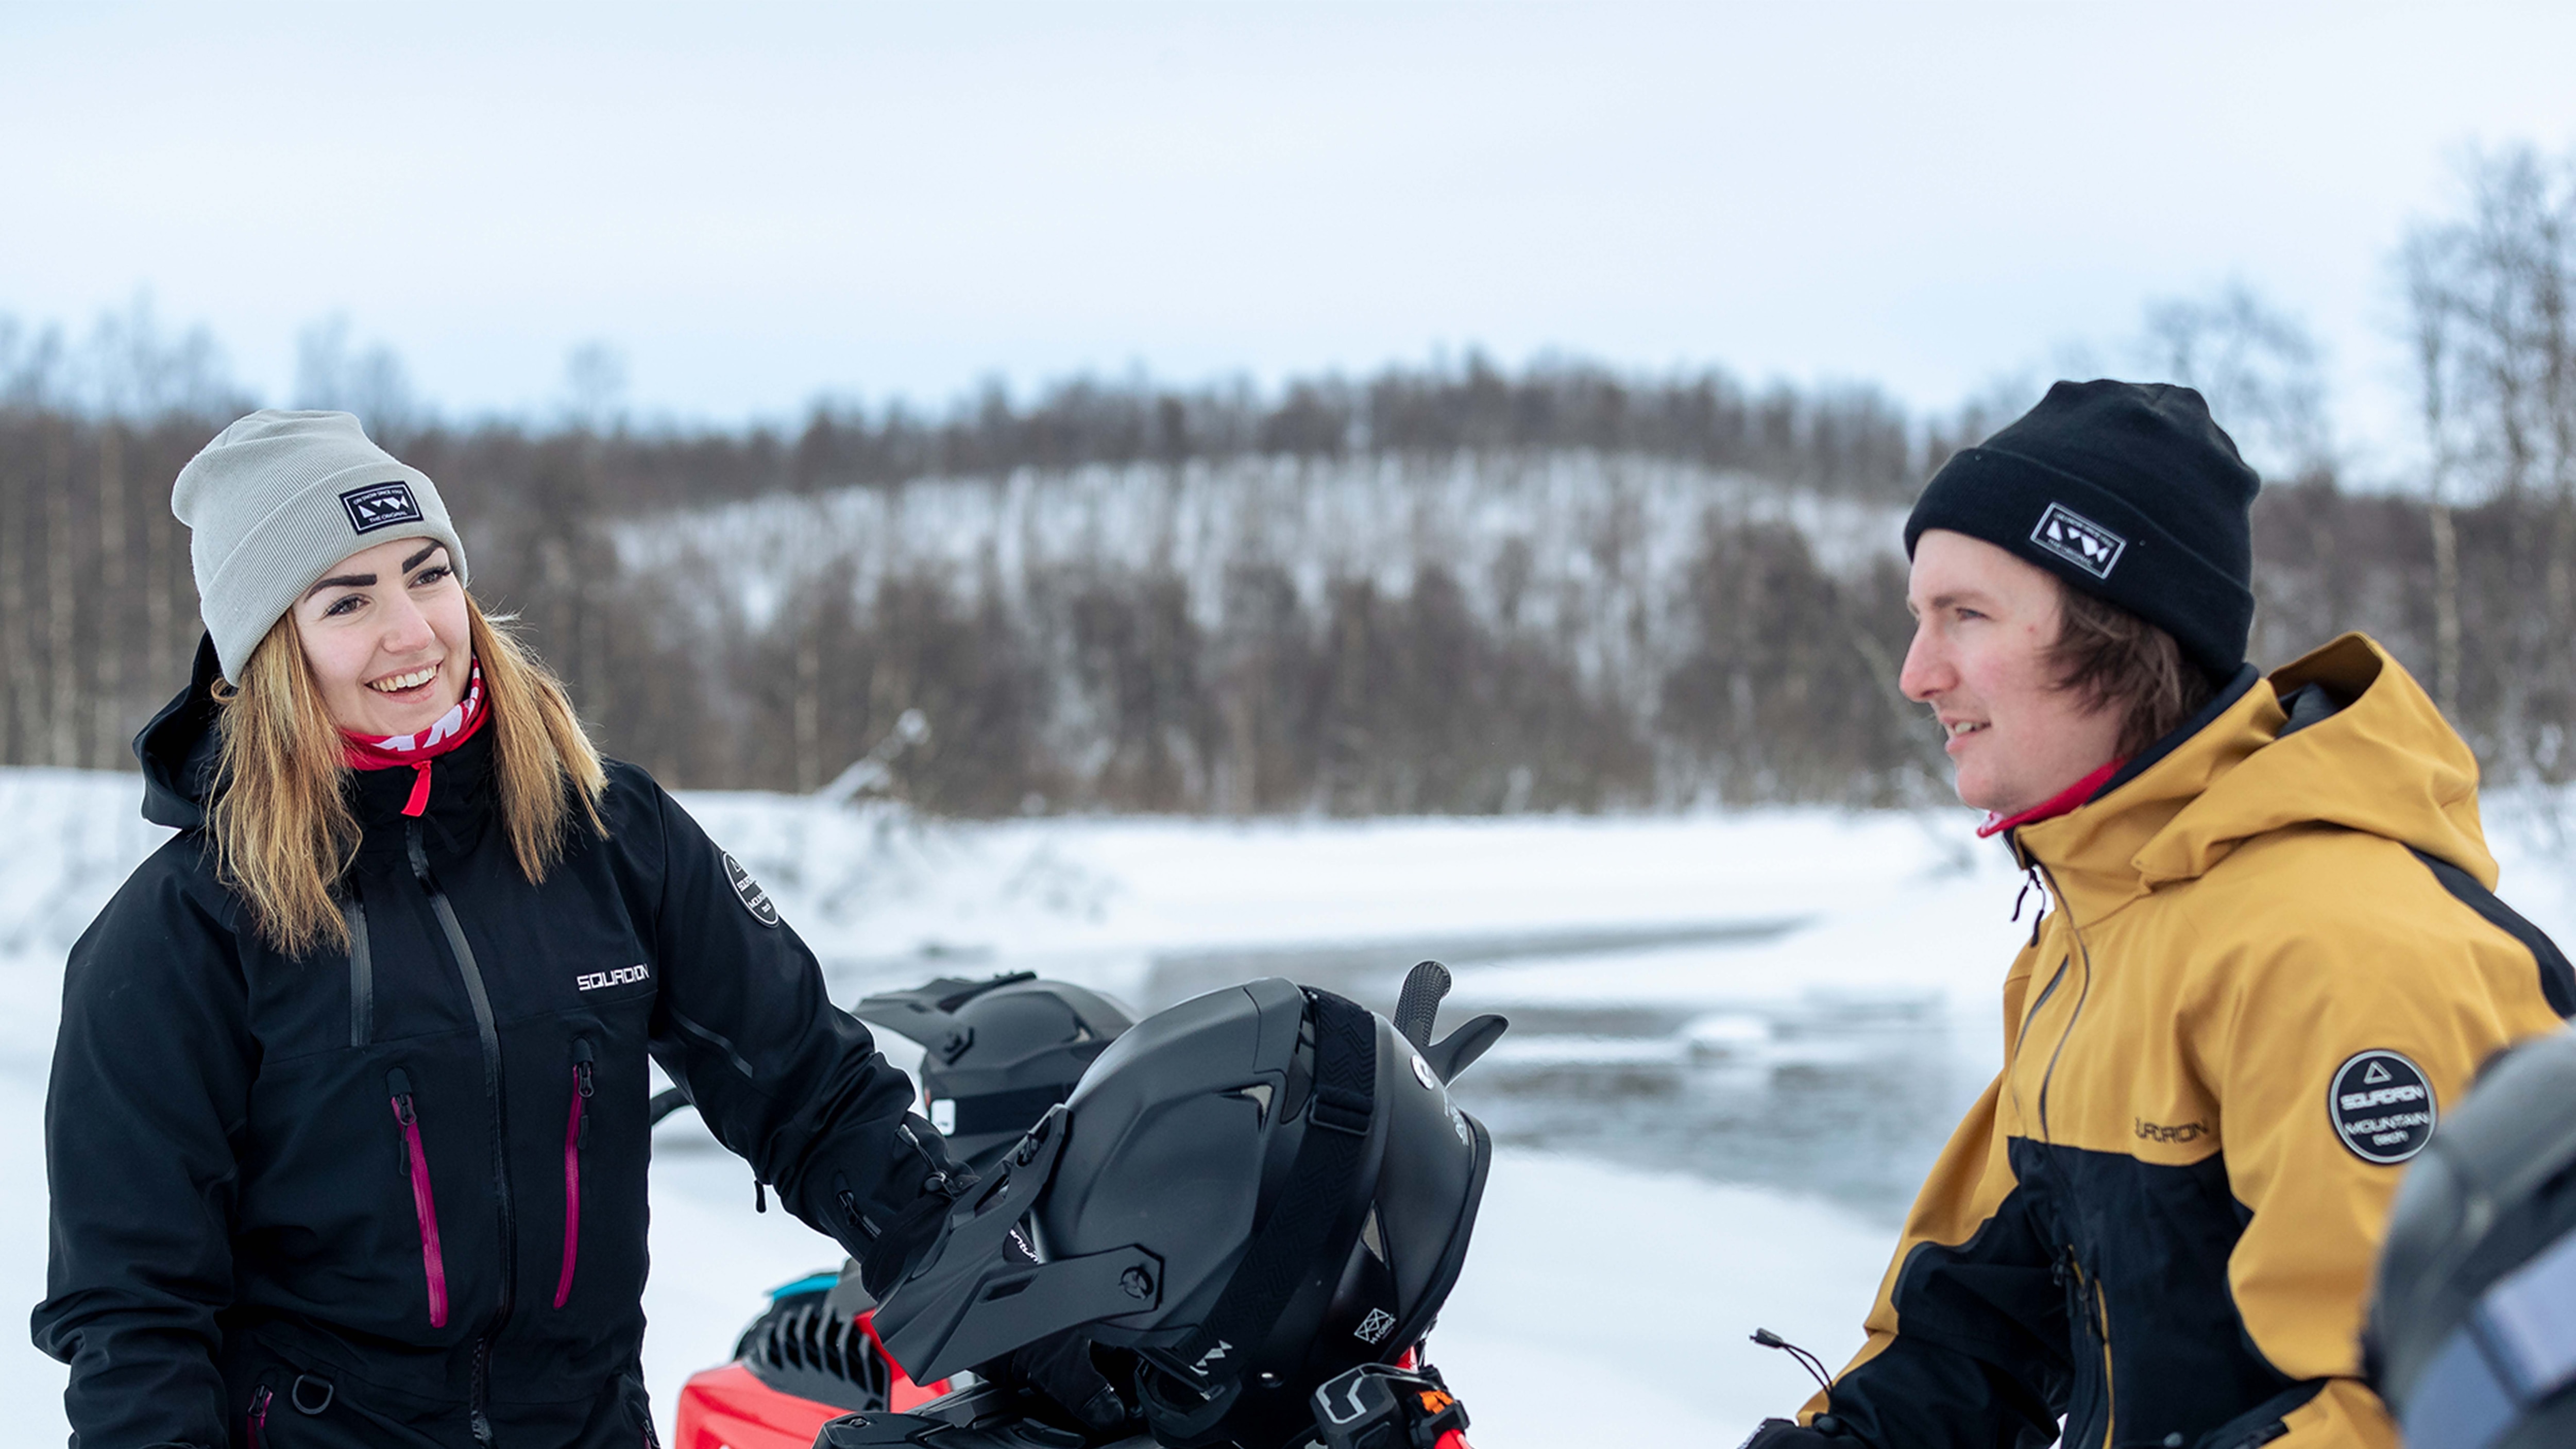 Couple laughing on snowmobiles